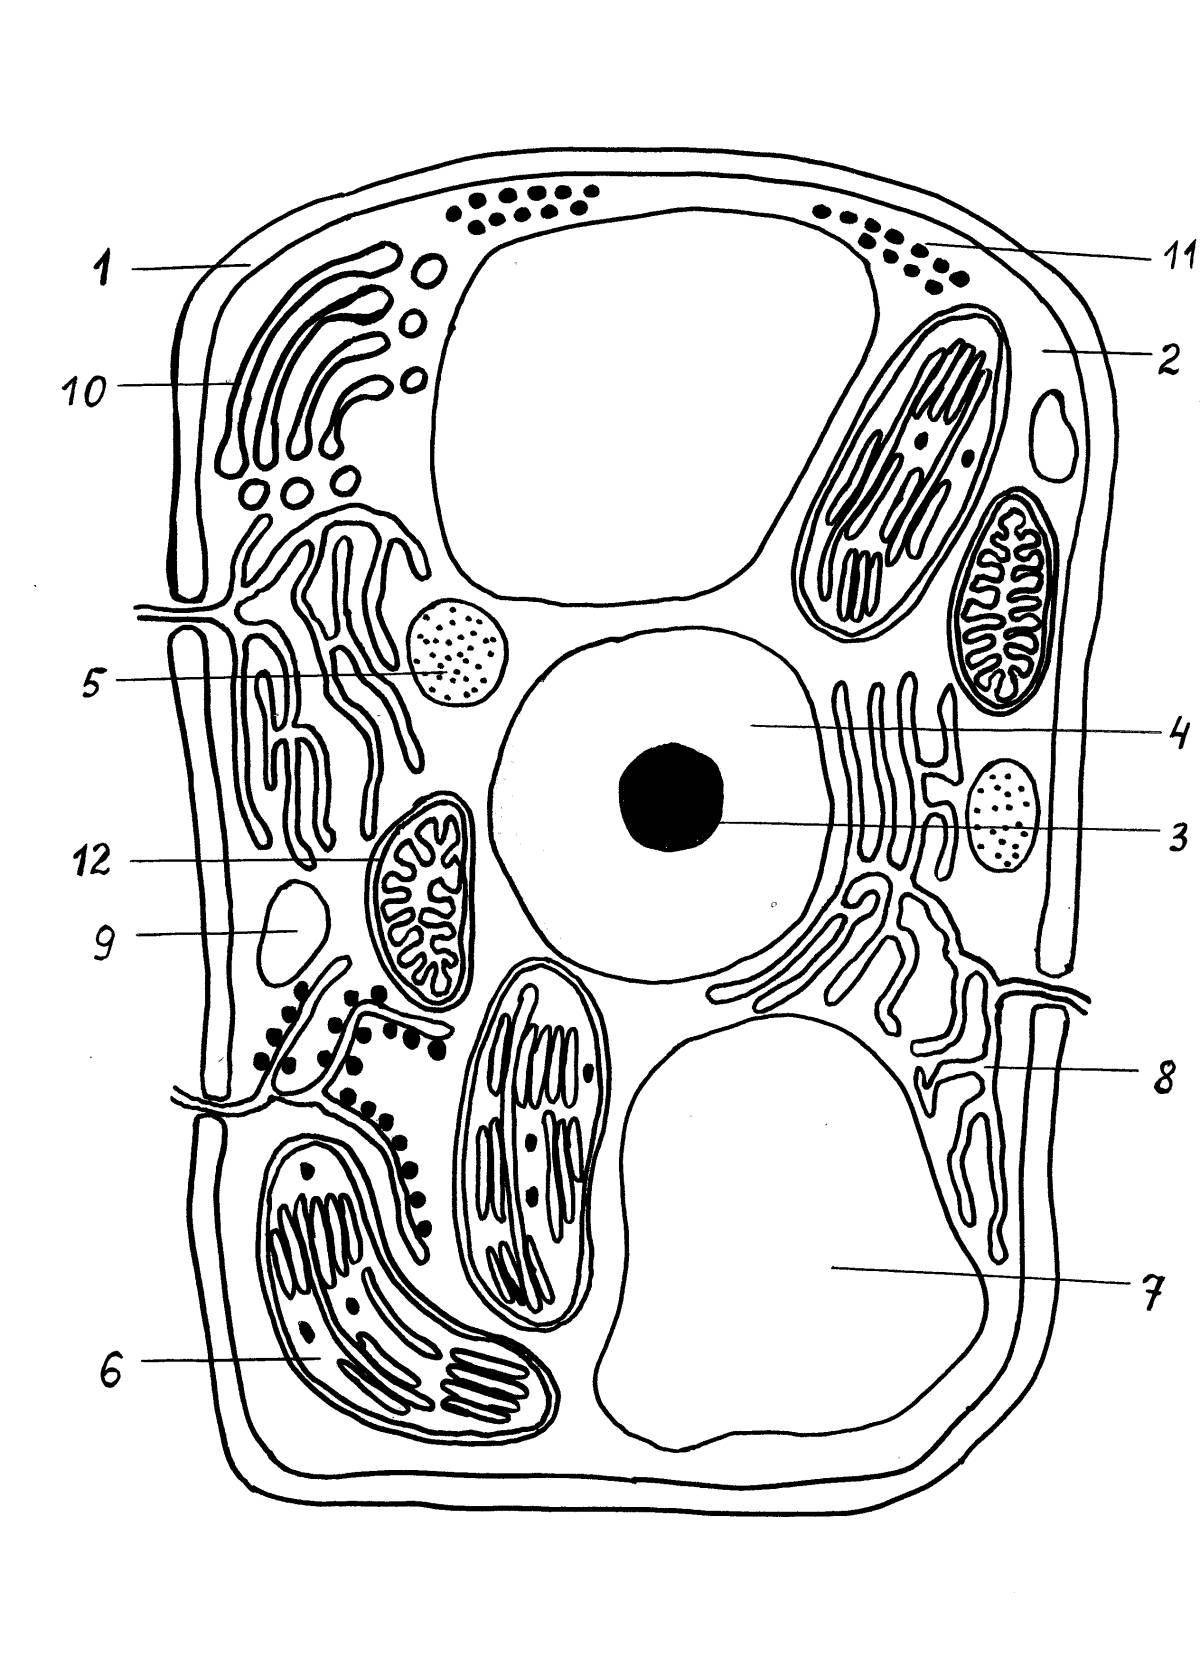 Coloring book shiny structure of plant cells